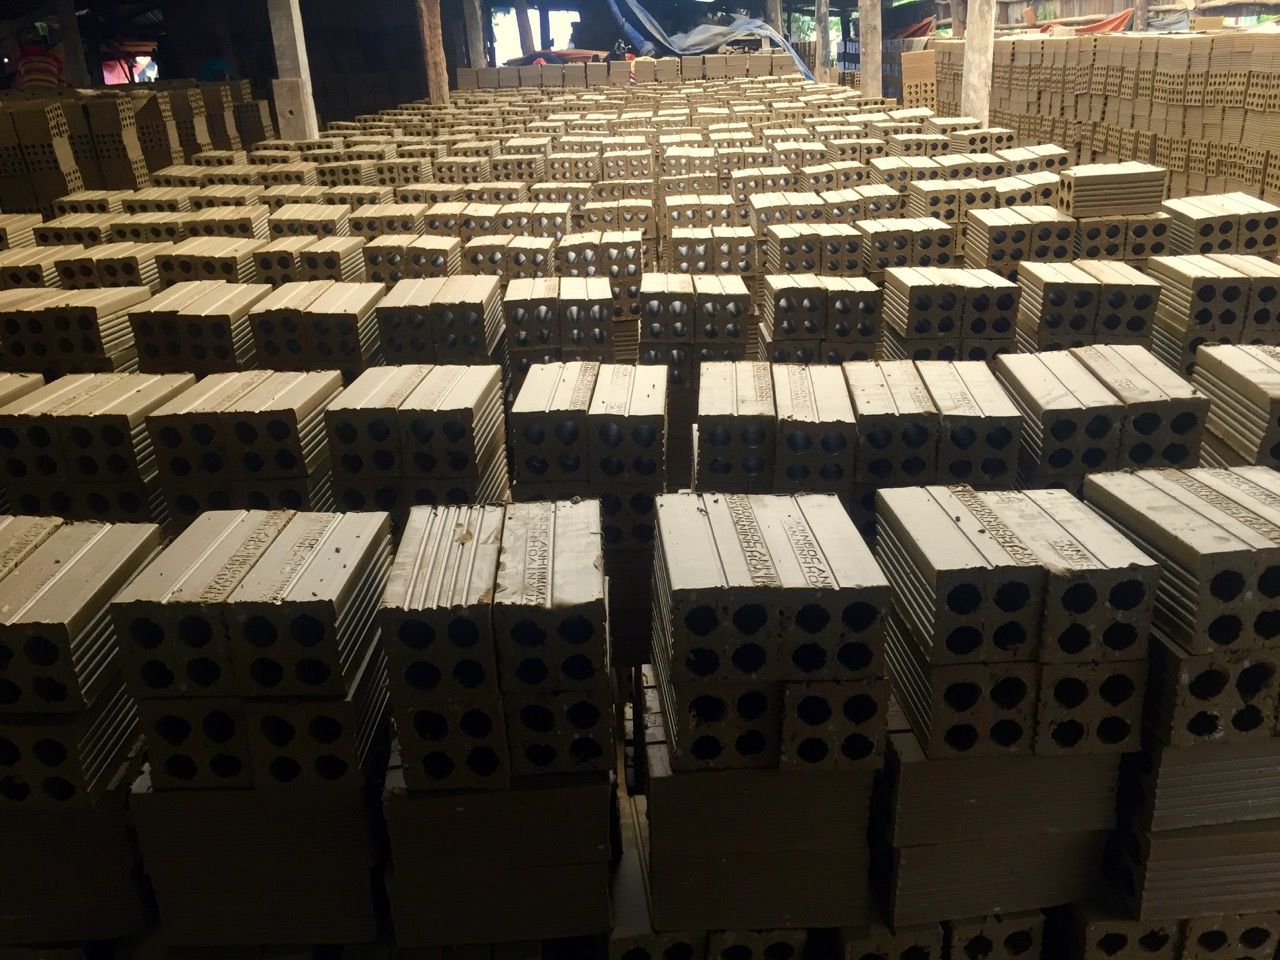 Rows of clay bricks before they have been baked.